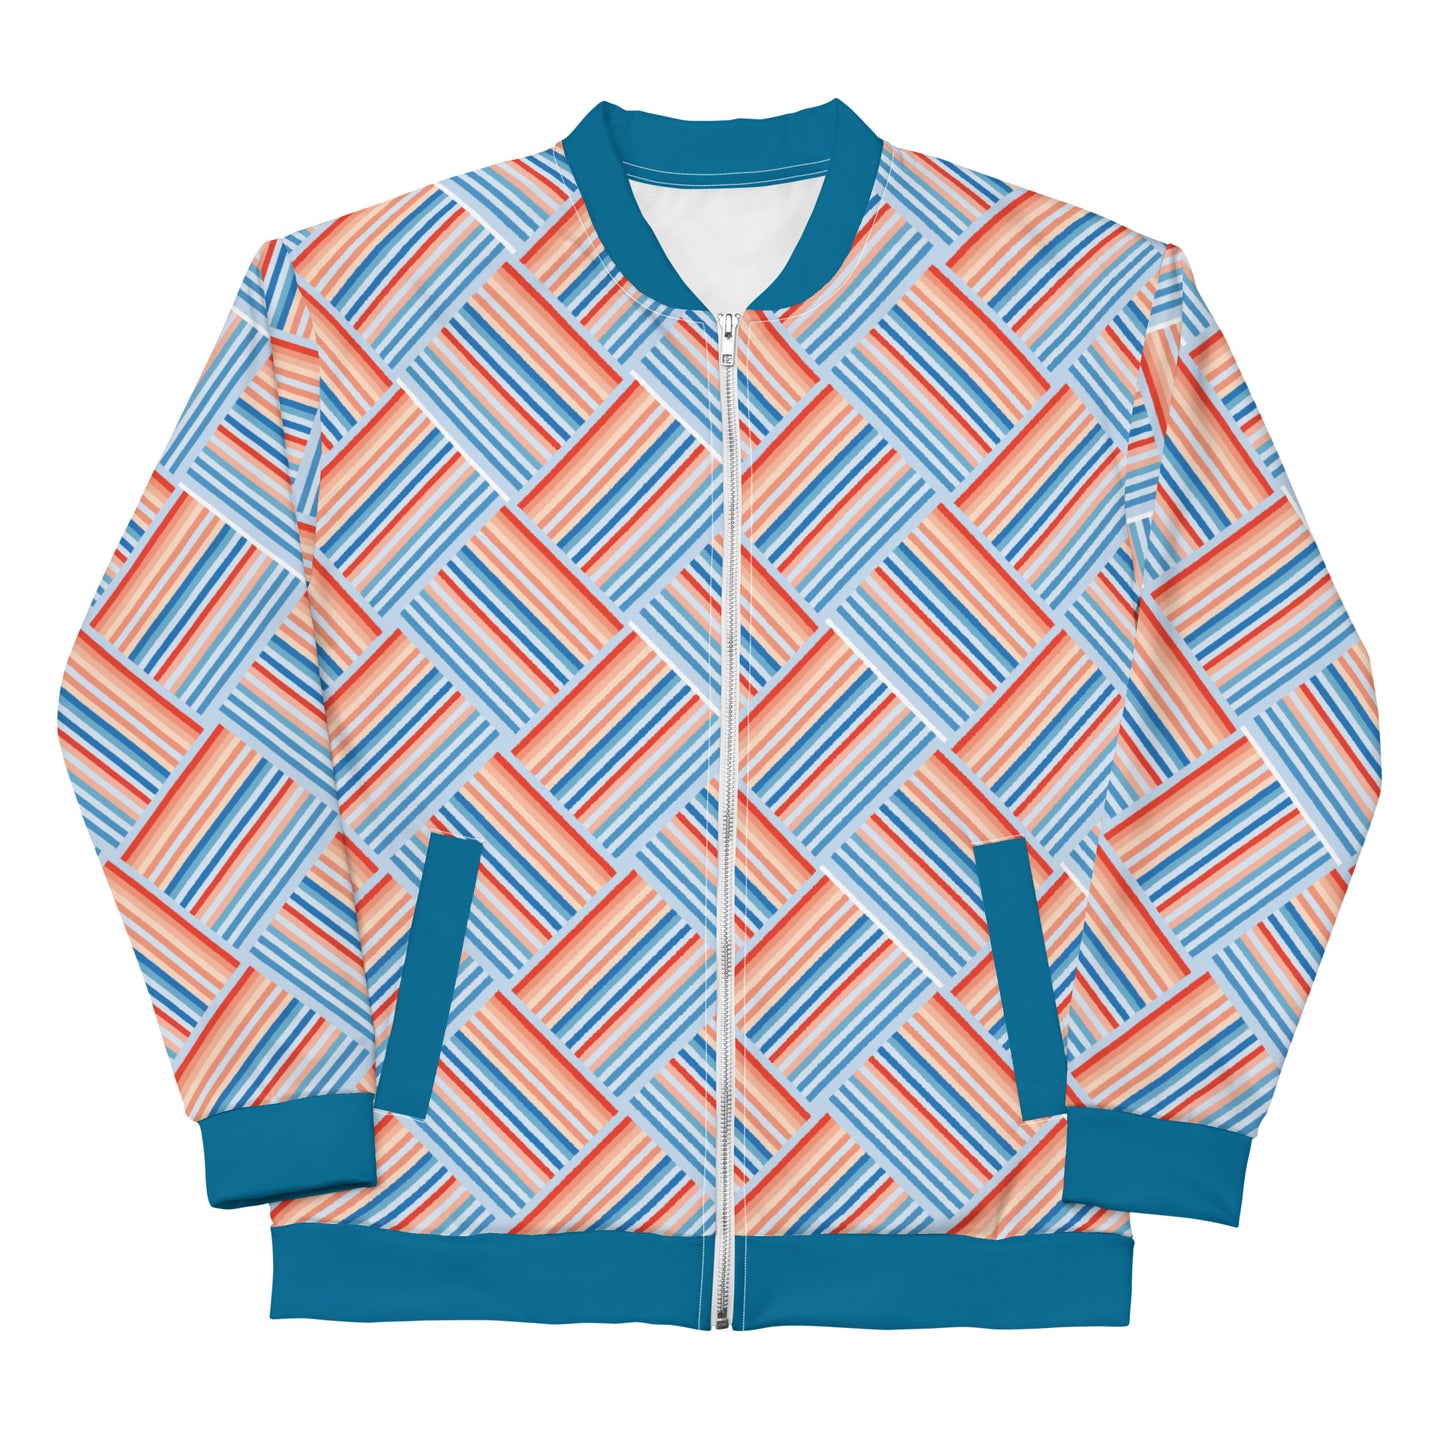 Climate Change Global Warming Stripes | Pattern - Sustainably Made Bomber Jacket